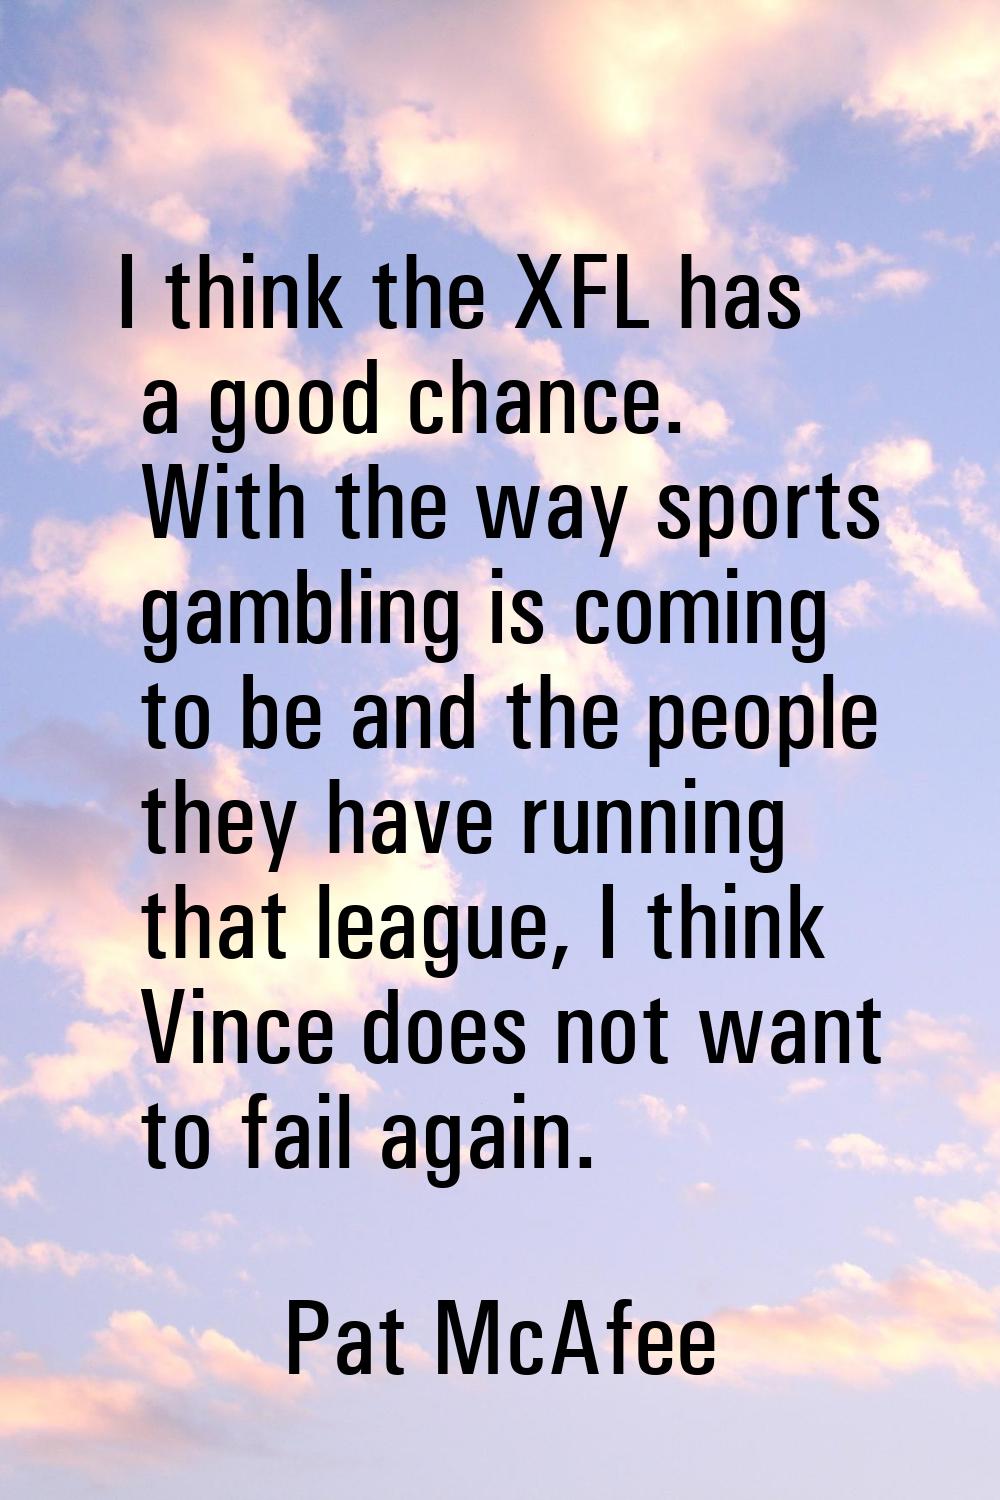 I think the XFL has a good chance. With the way sports gambling is coming to be and the people they